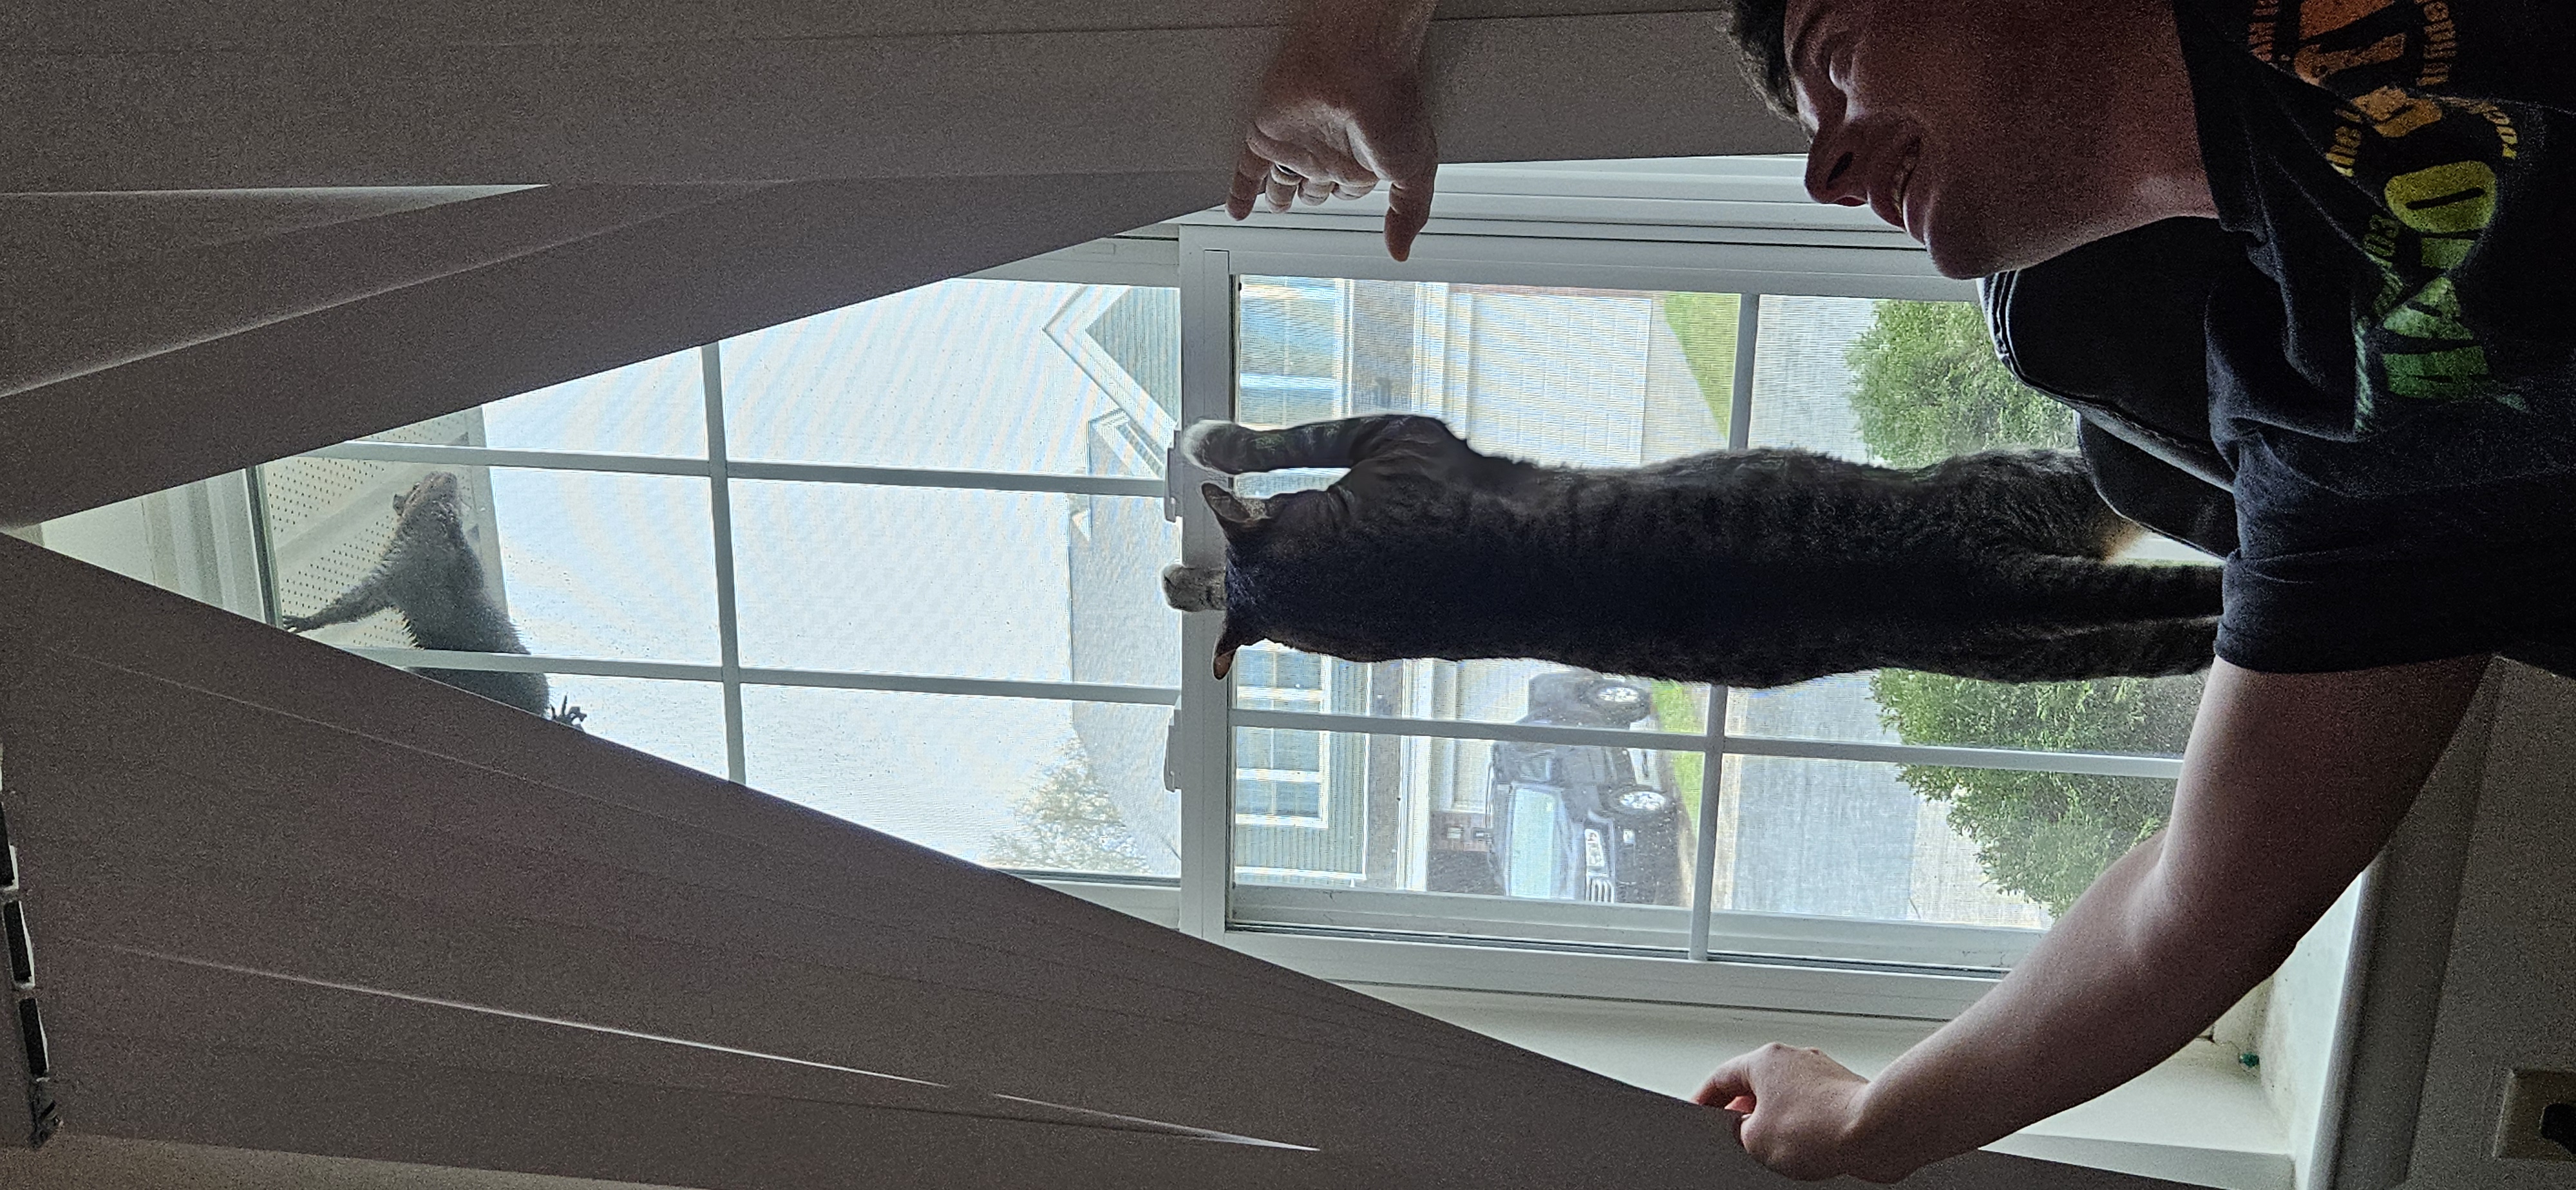 Suvee (my cat) attempts to attack a squirrel by jumping at our living room window